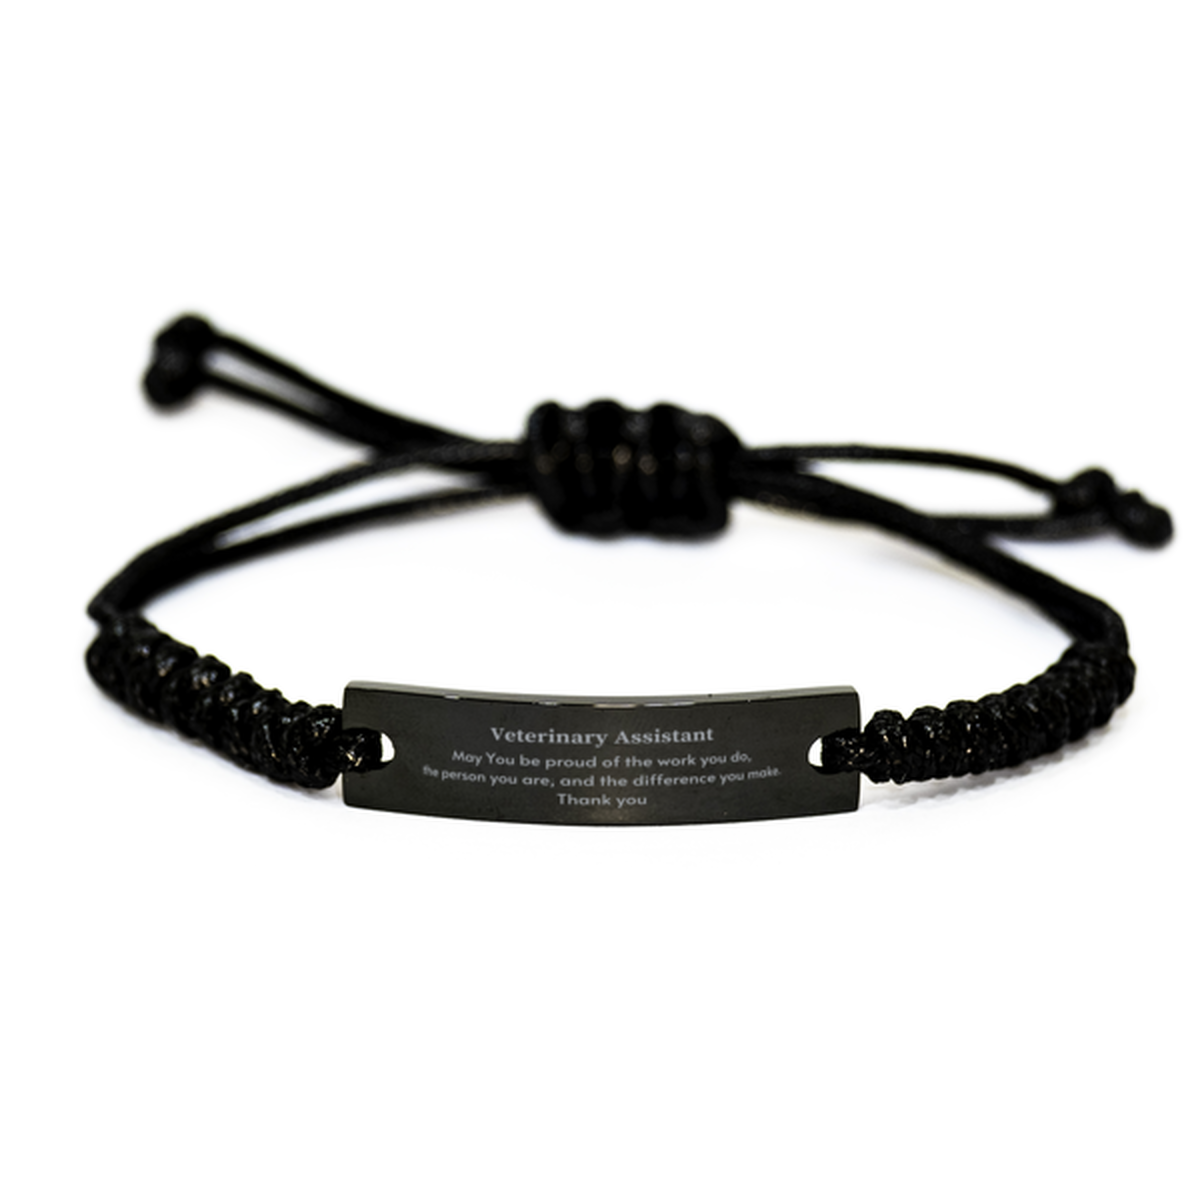 Heartwarming Black Rope Bracelet Retirement Coworkers Gifts for Veterinary Assistant, Veterinary Assistant May You be proud of the work you do, the person you are Gifts for Boss Men Women Friends